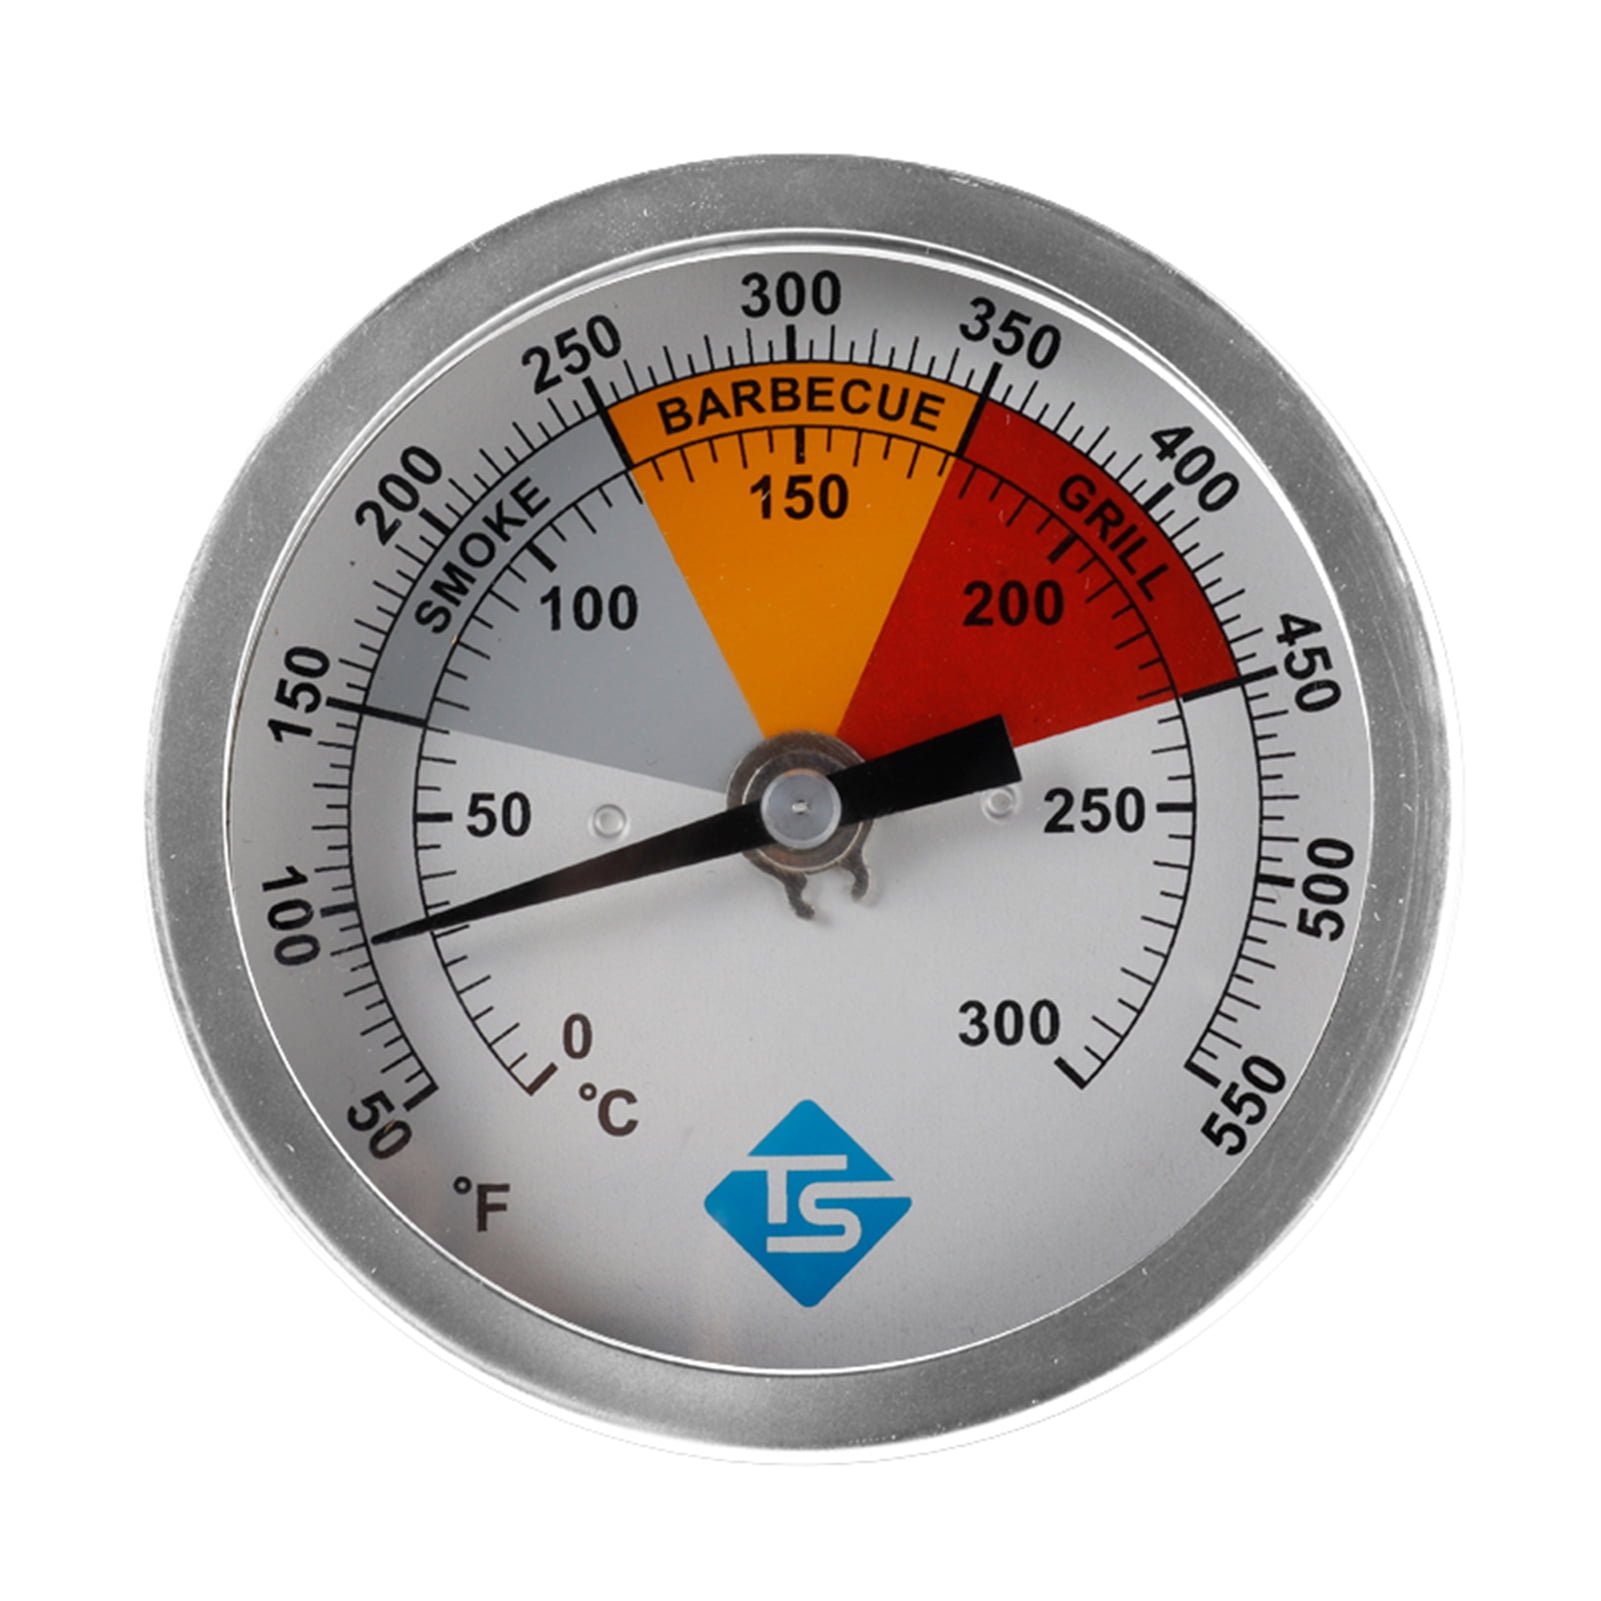 Stainless Steel Oven Cooker Thermometer Temperature Gauge 0-300 °C Durable